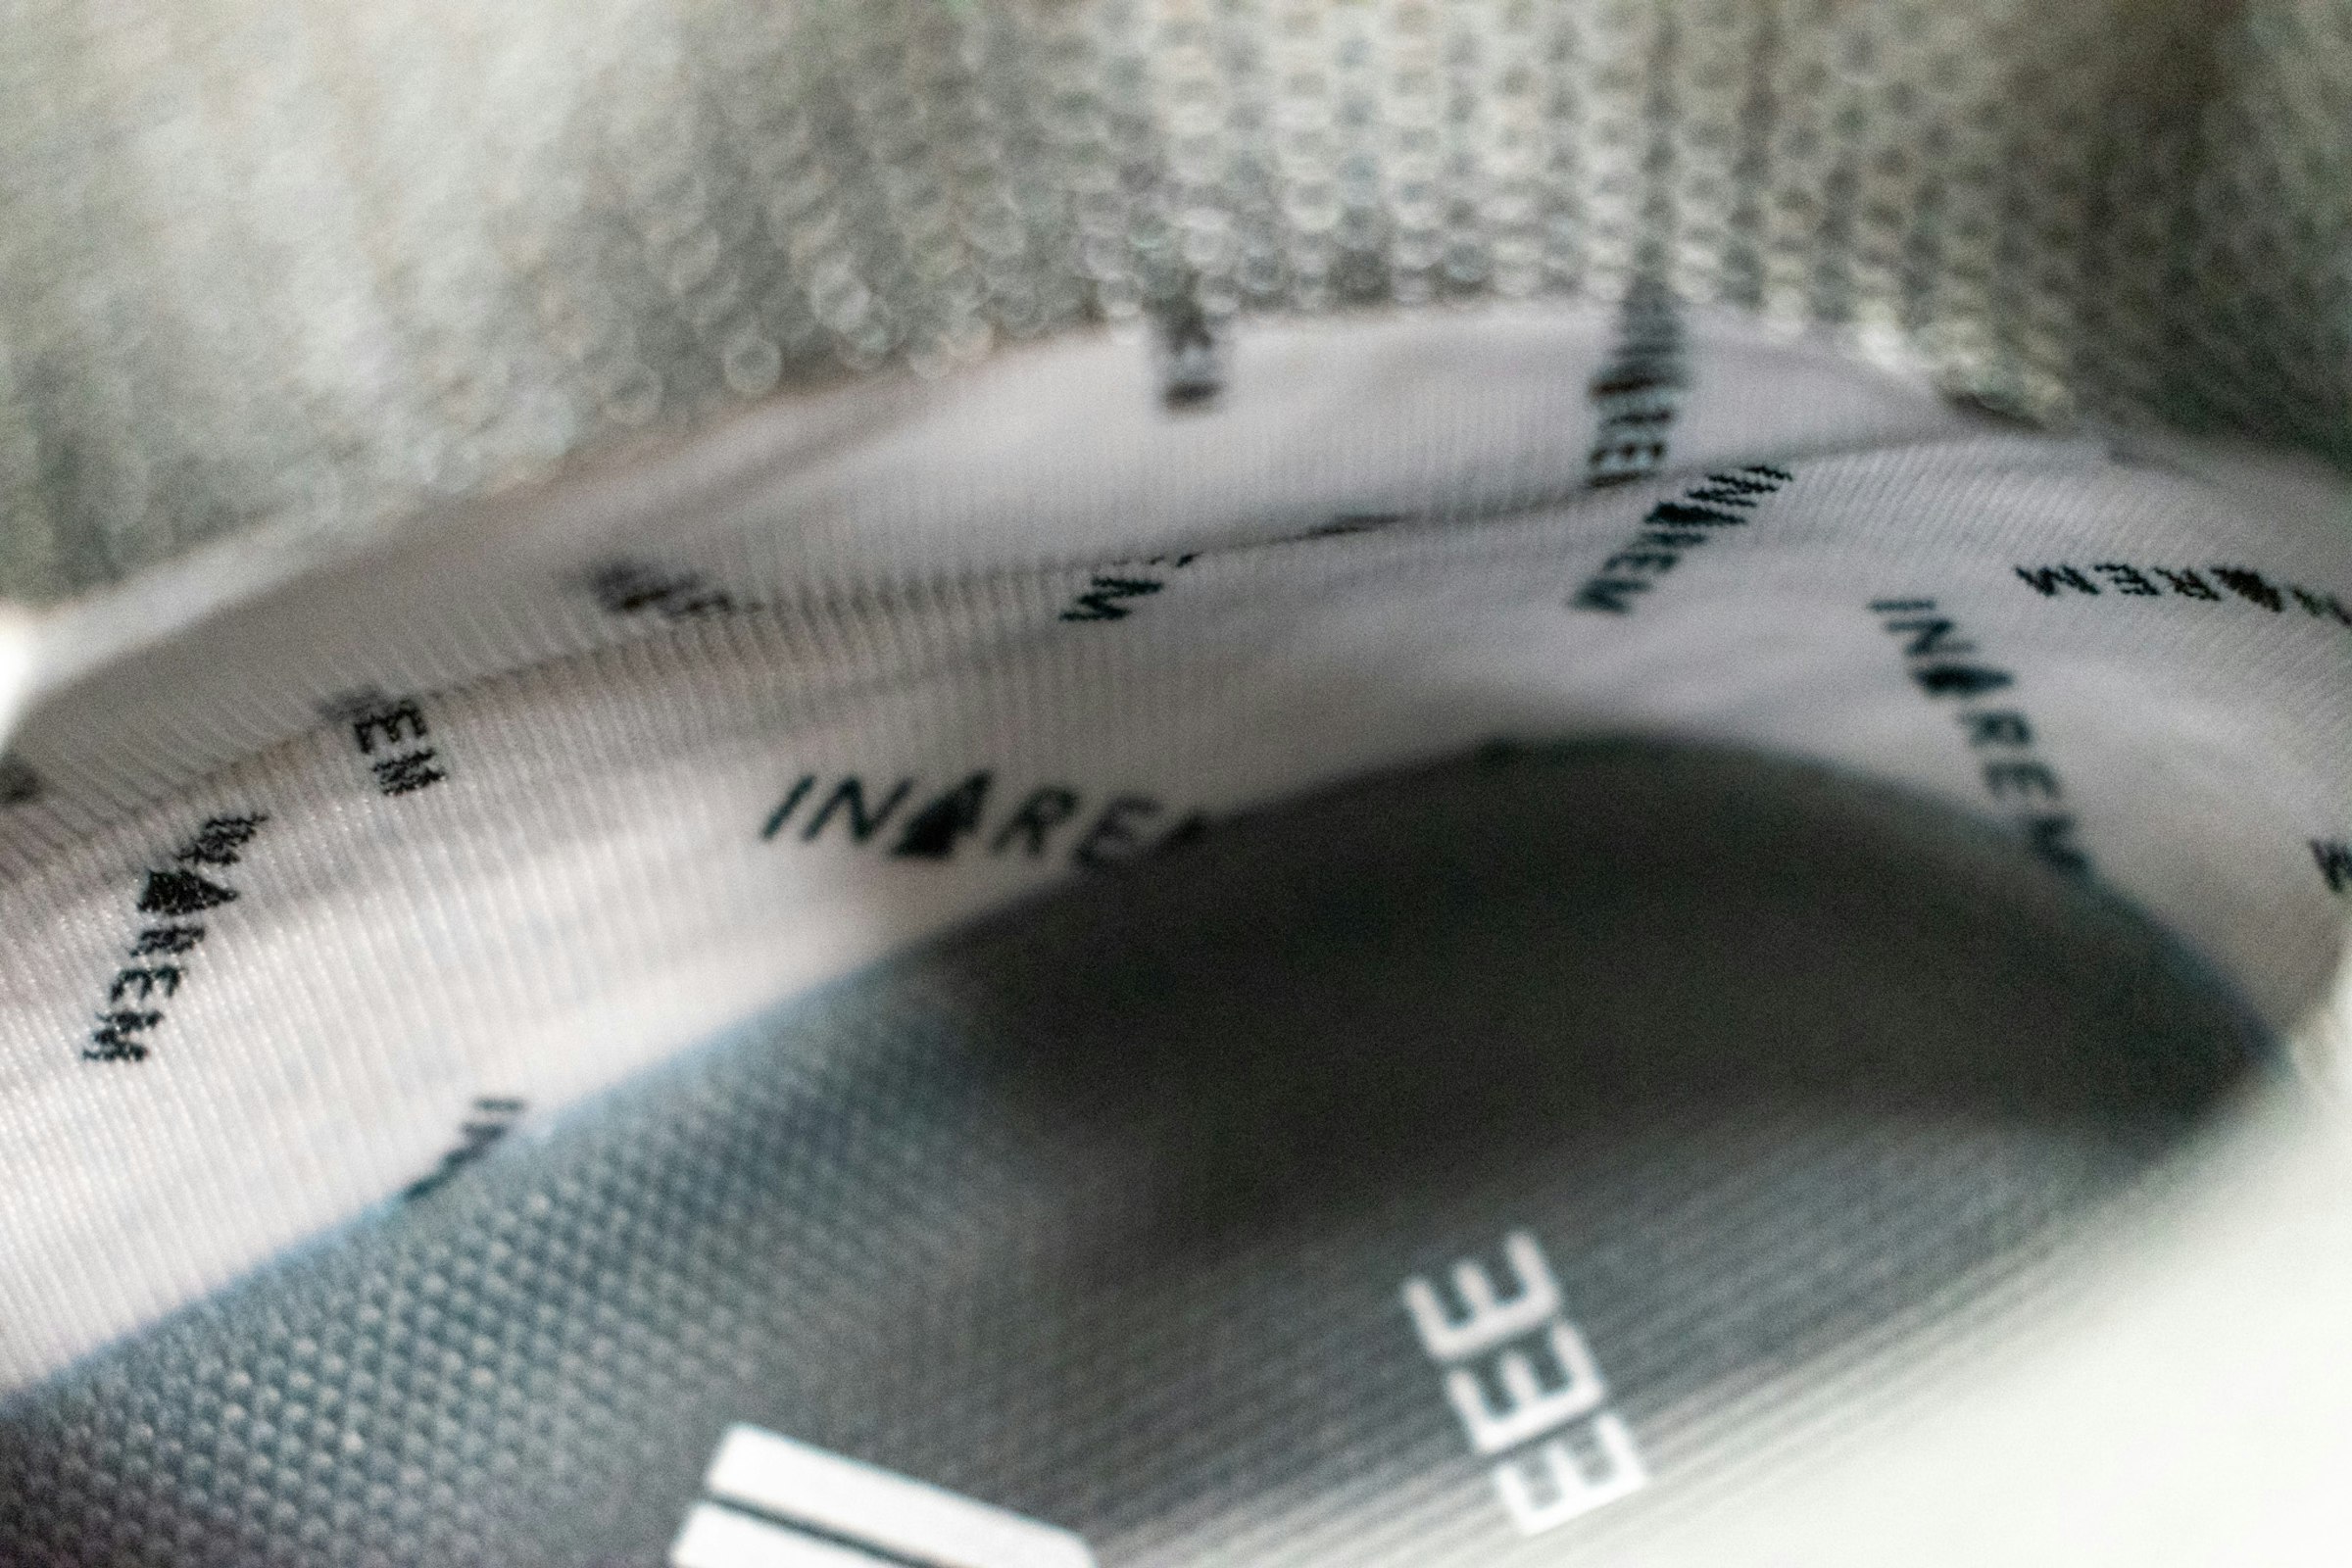 Inalem logo on the inside of the shoe